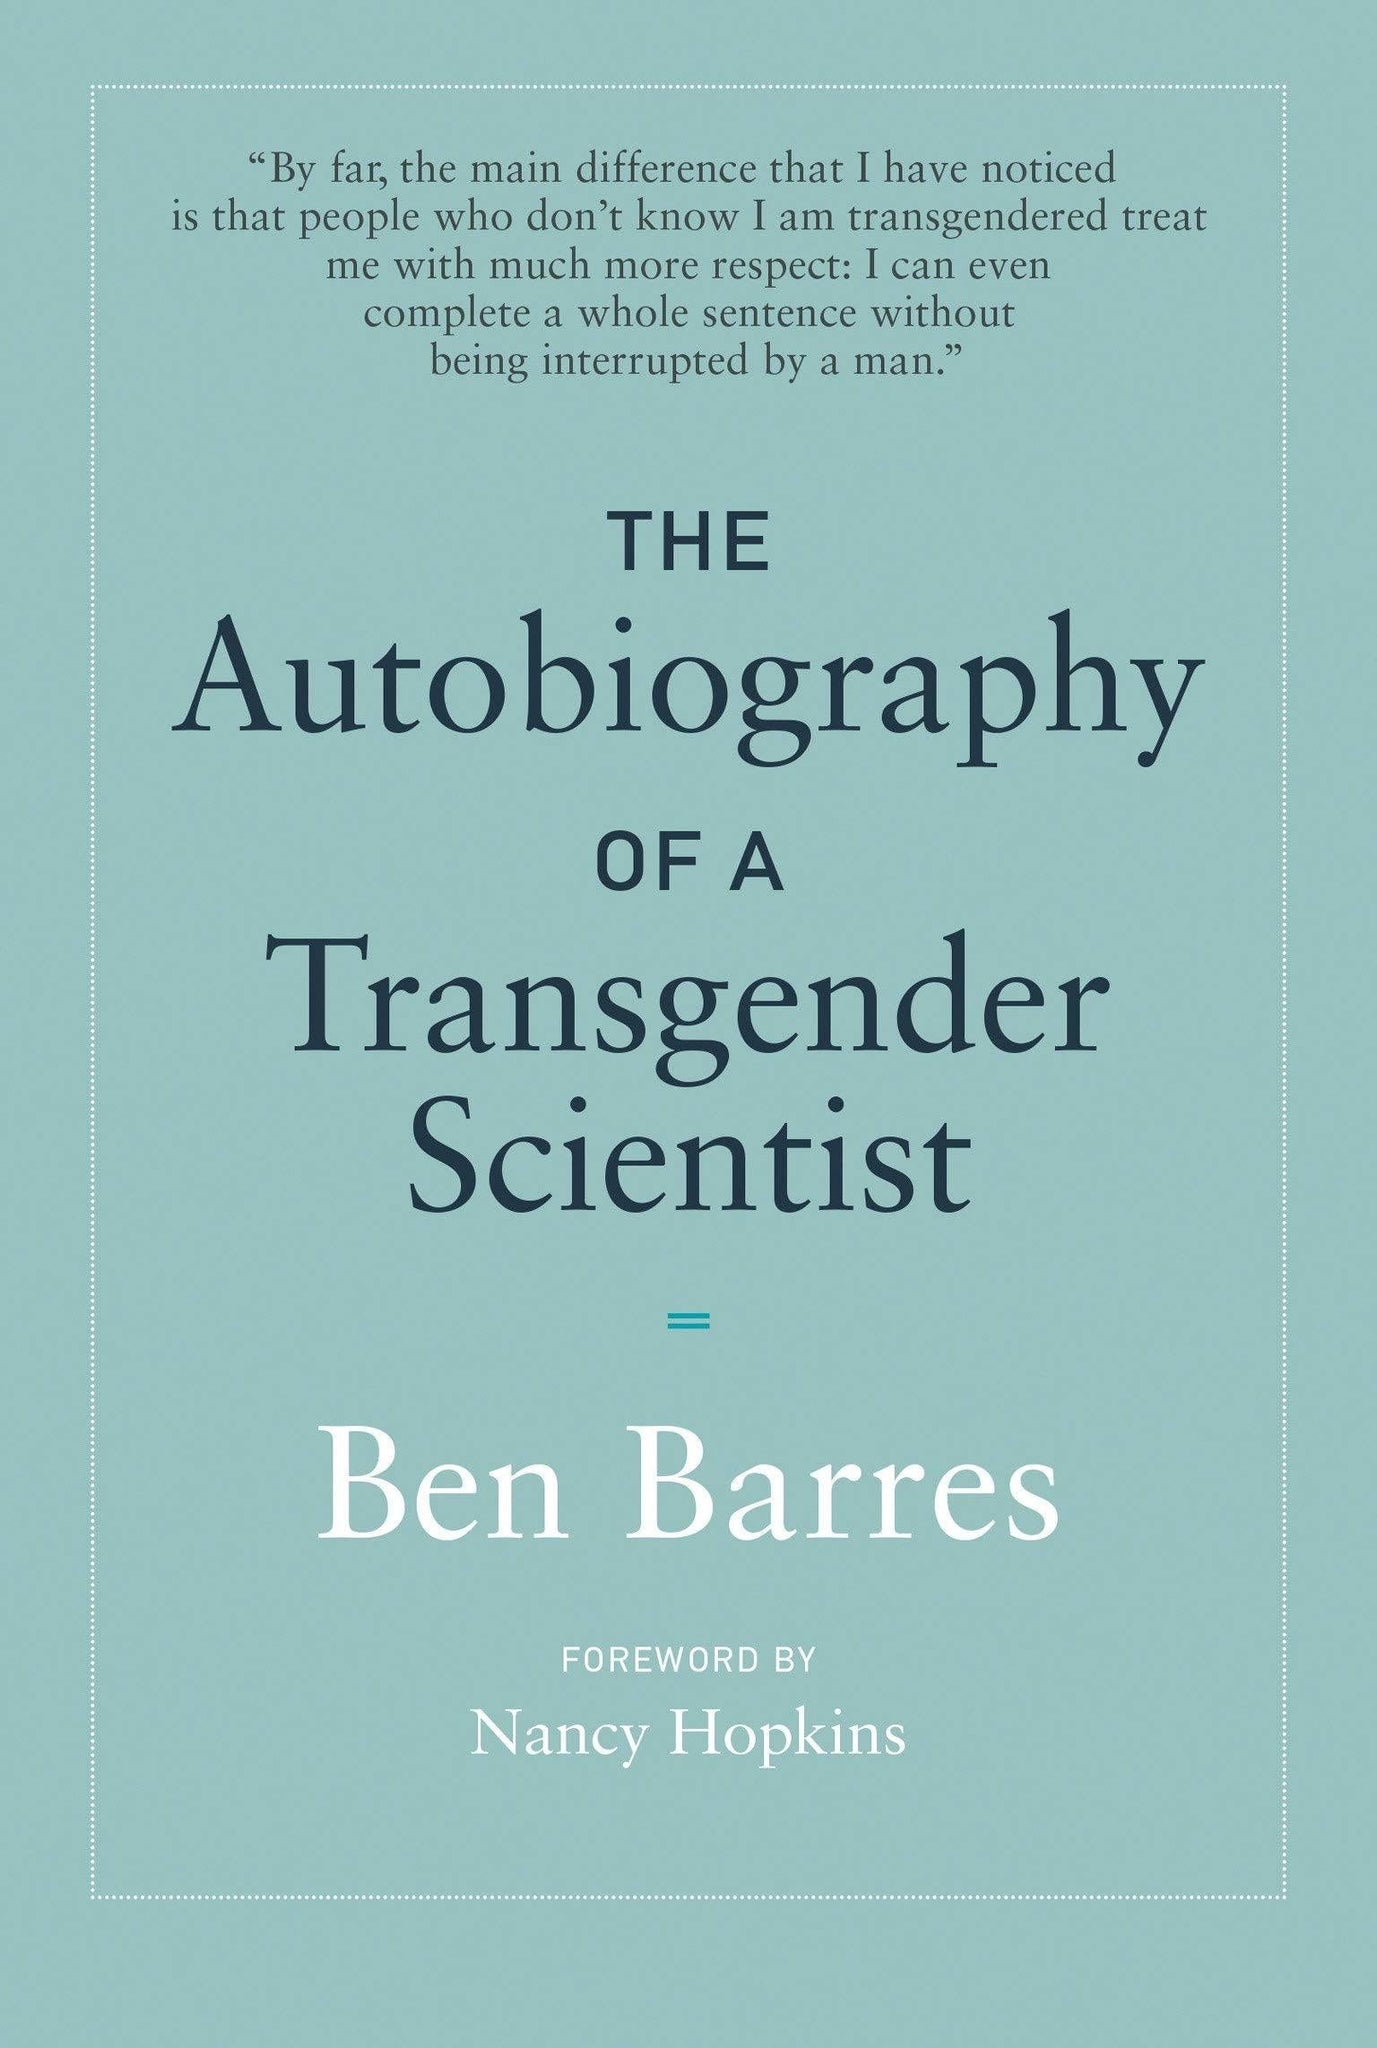 The Autobiography of a Transgender Scientist - ShopQueer.co